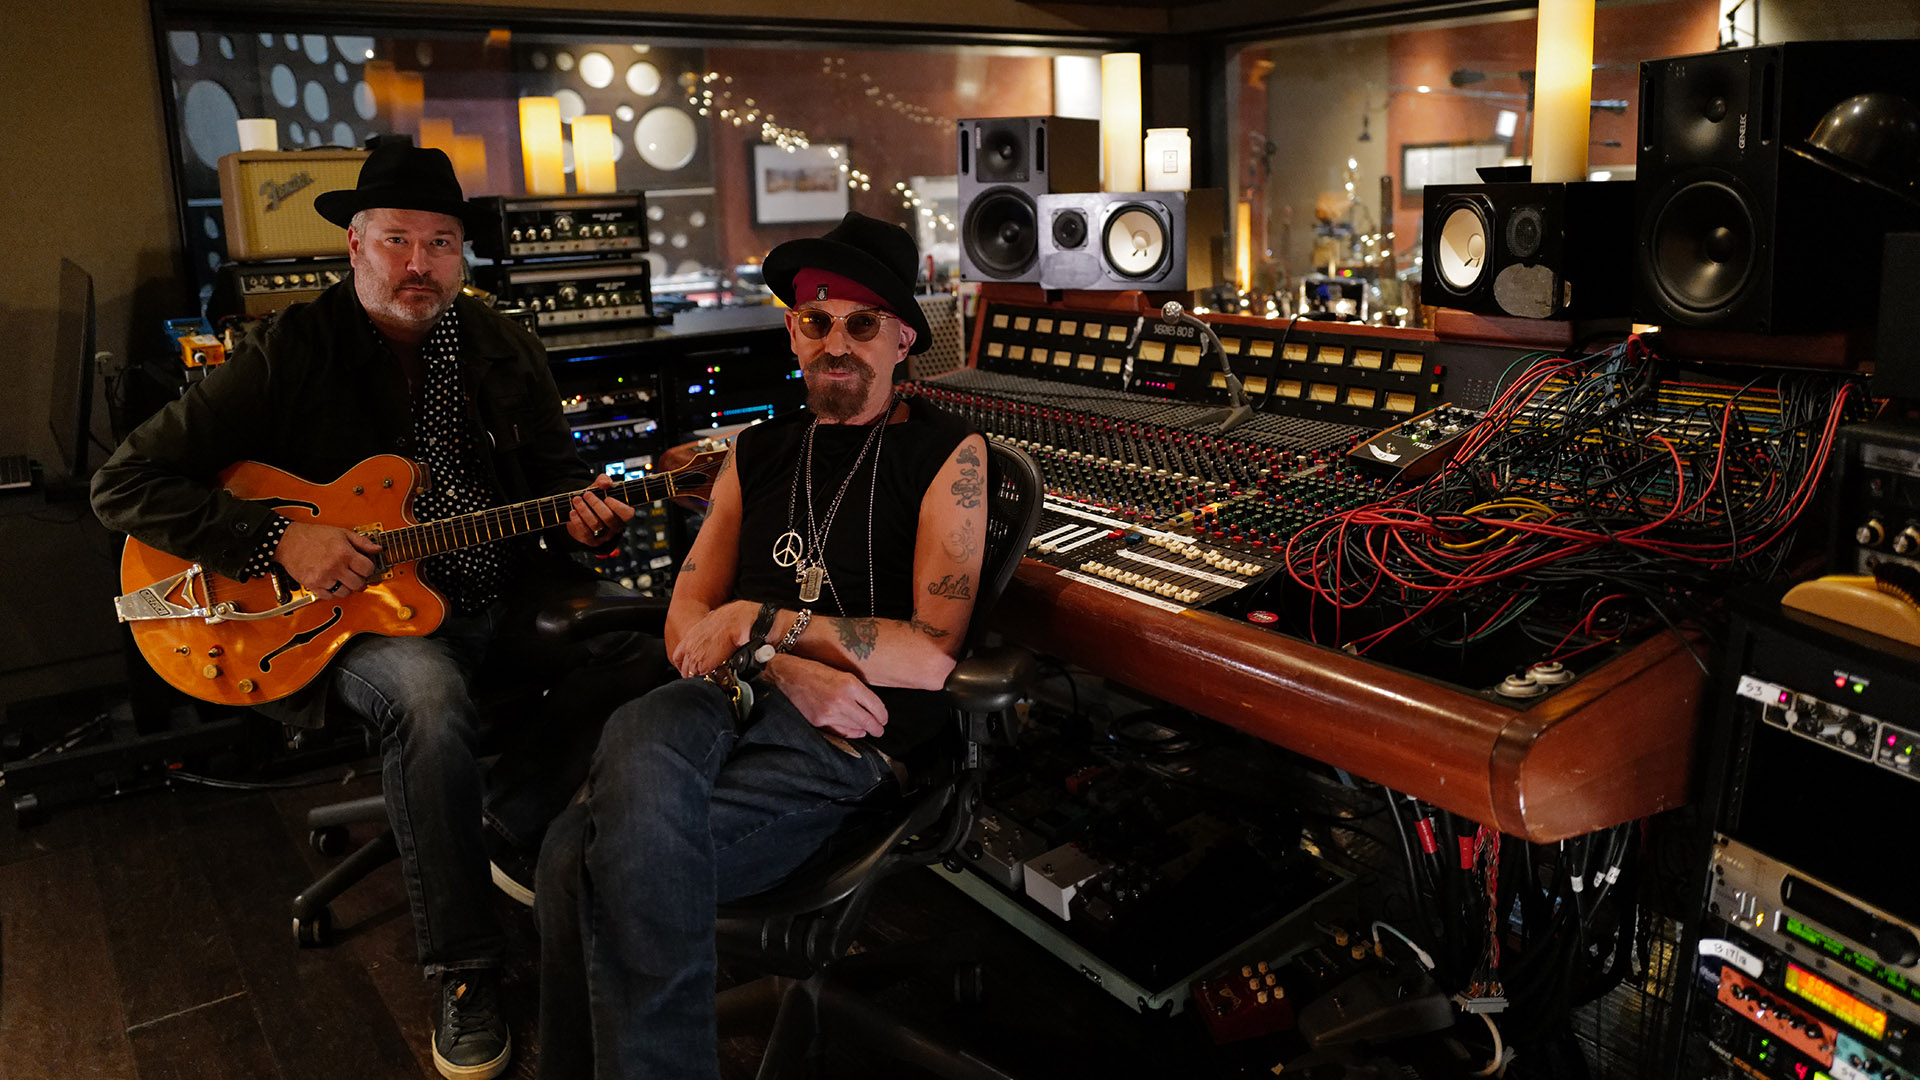 Two men sit in chairs inside a music studio. They smile while facing the camera.